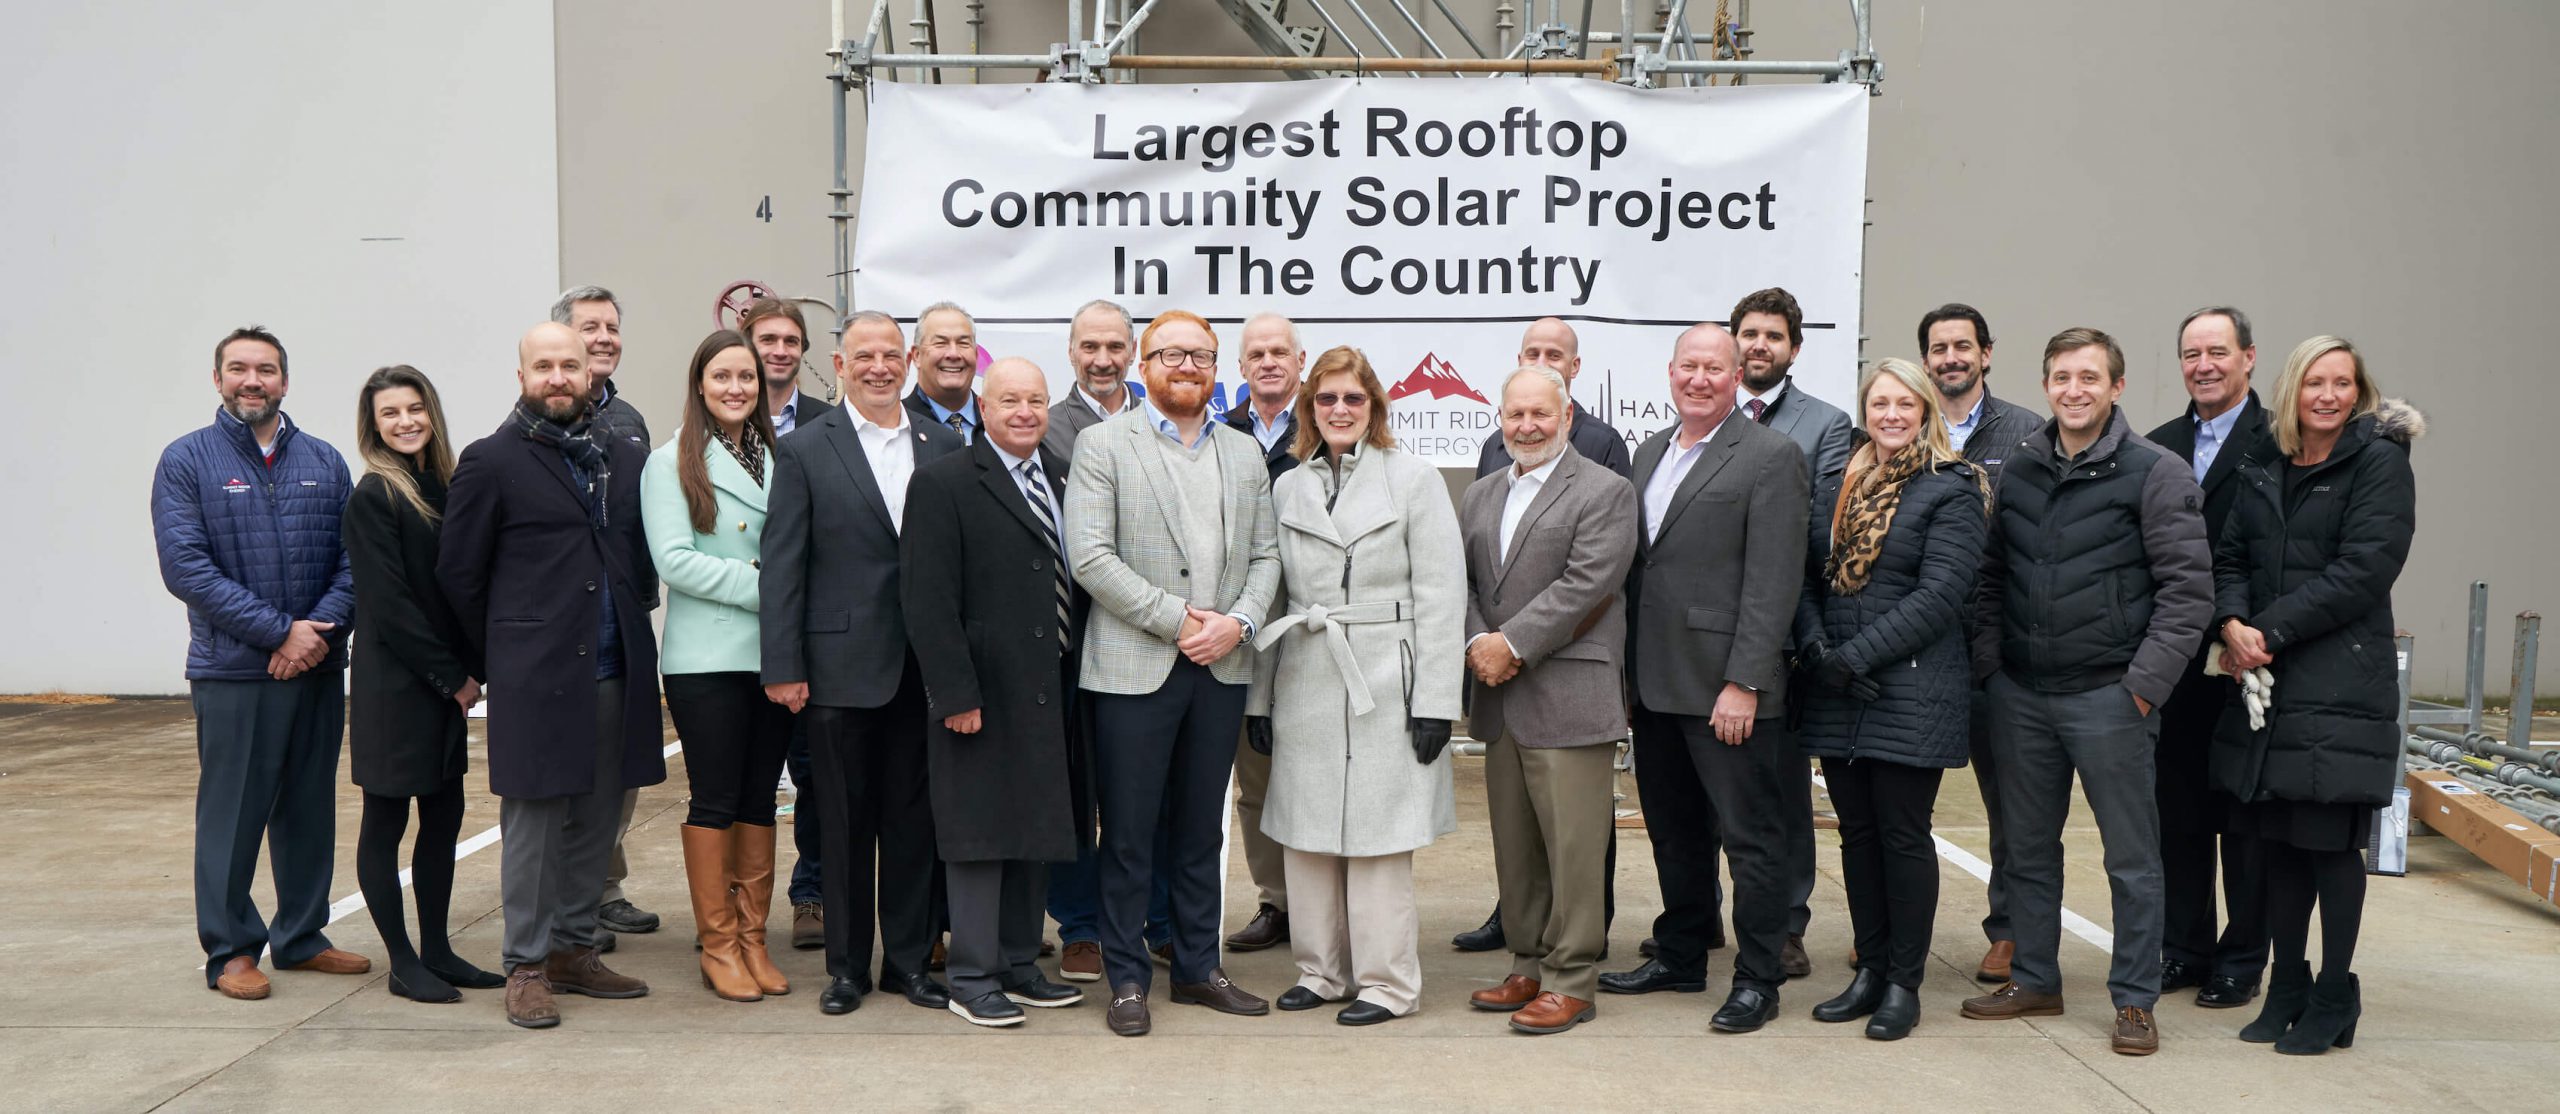 Summit Ridge Energy acquires 11 community solar projects in Illinois from Pivot Energy